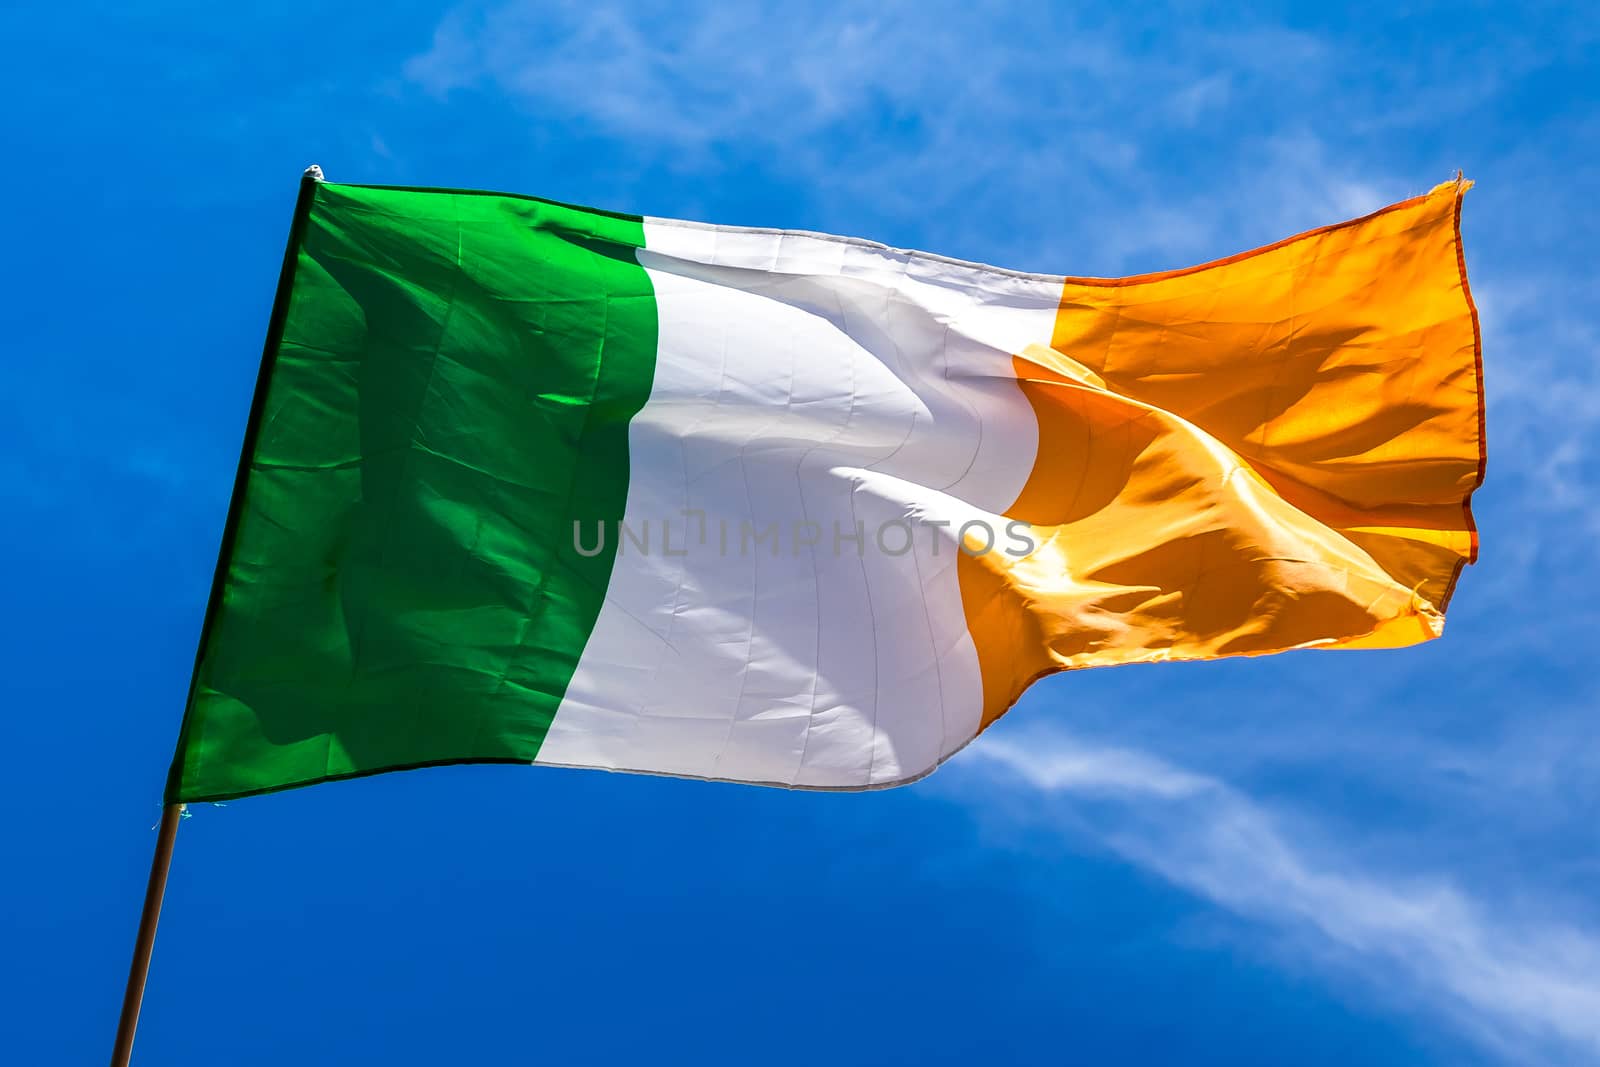 Irish flag fluttering in a brisk breeze against a bright blue sk by SeuMelhorClick